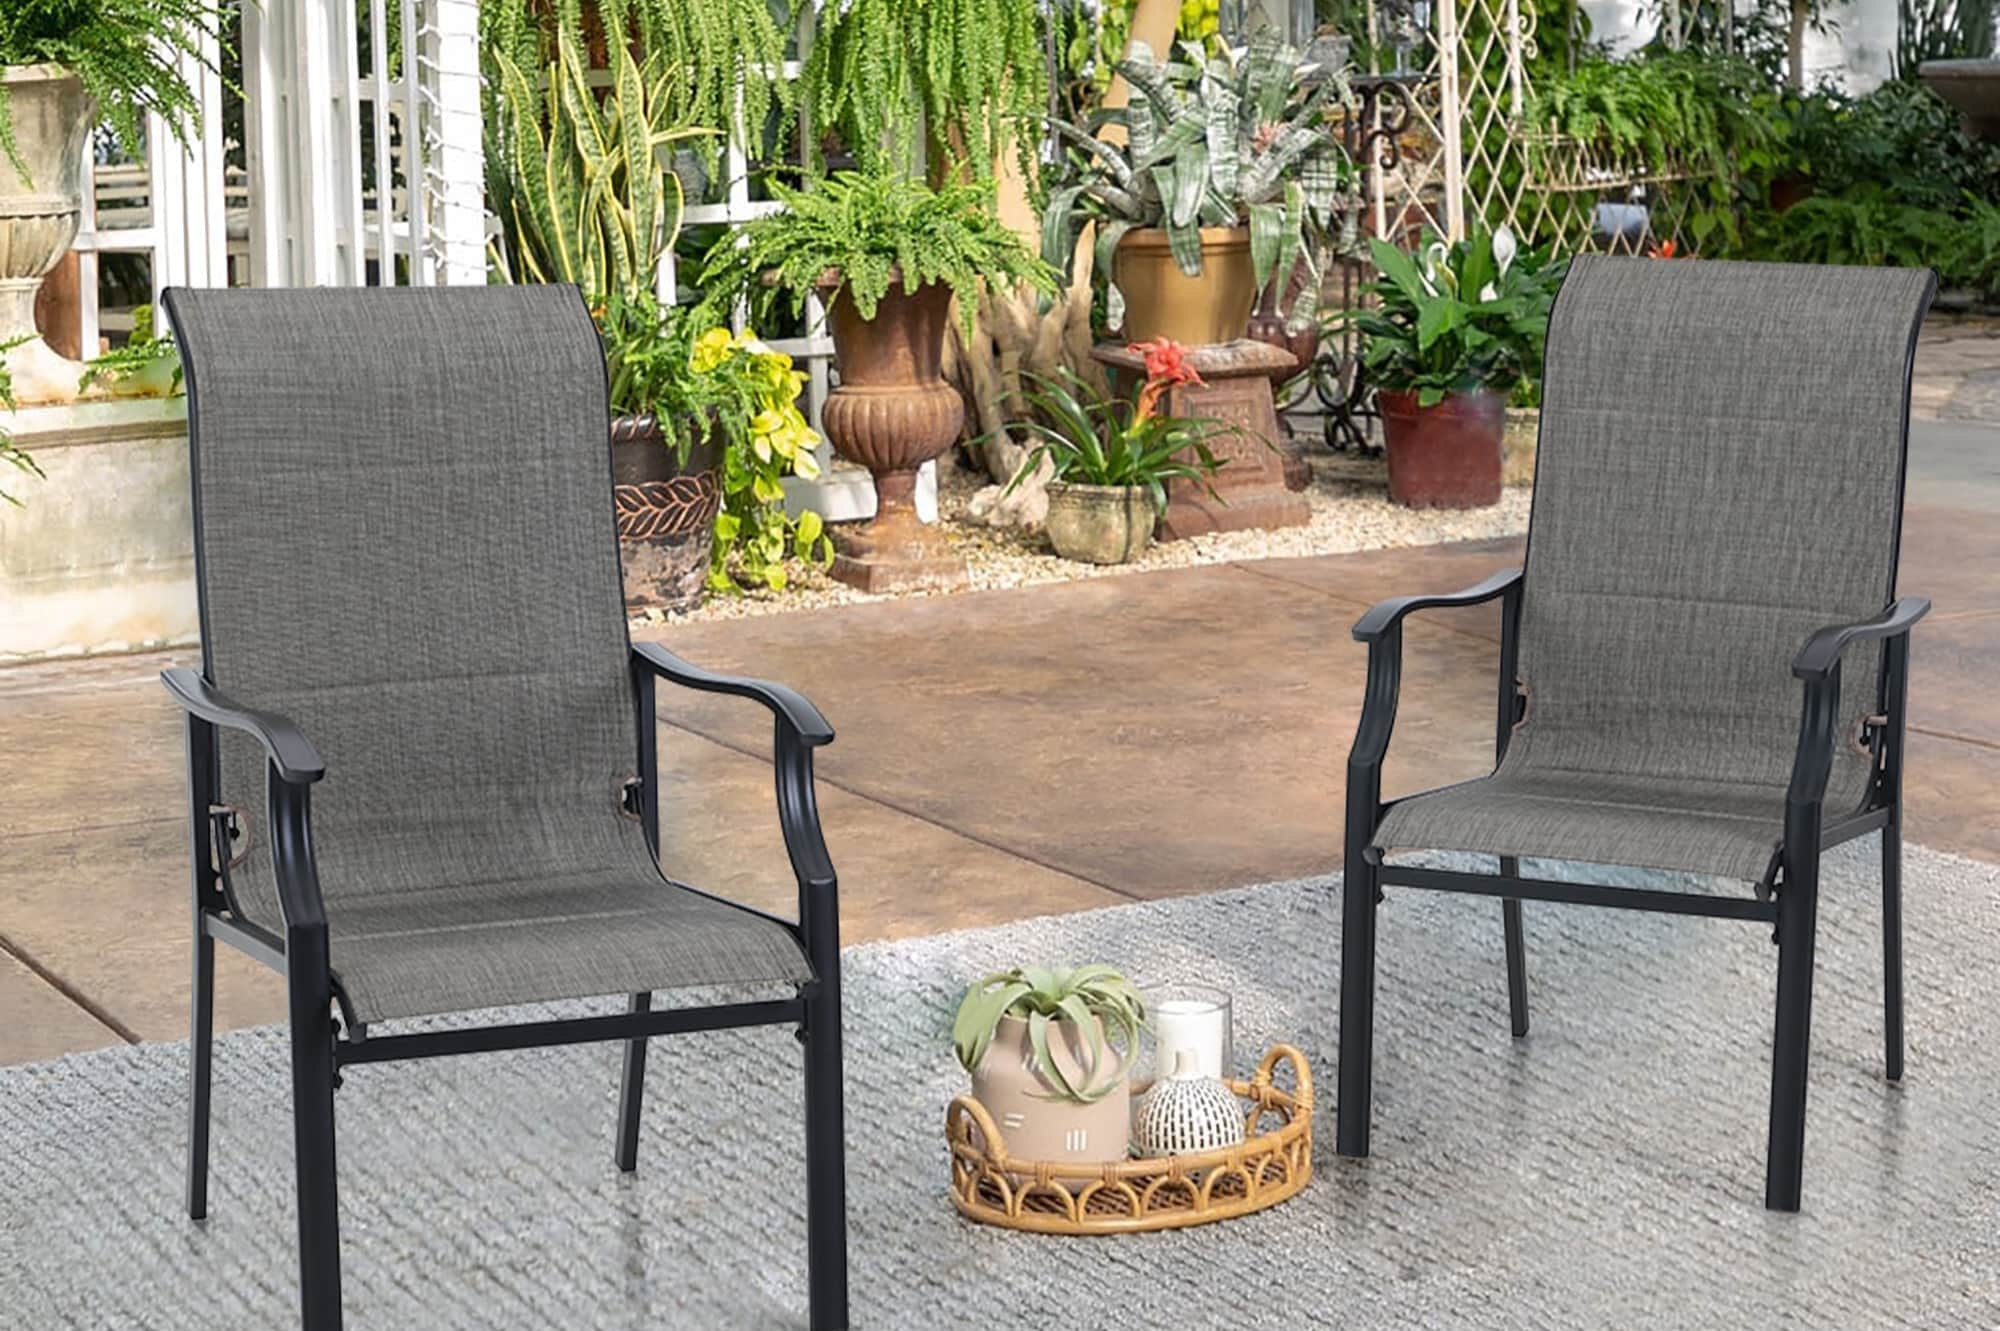 How To Clean Mesh Outdoor Furniture